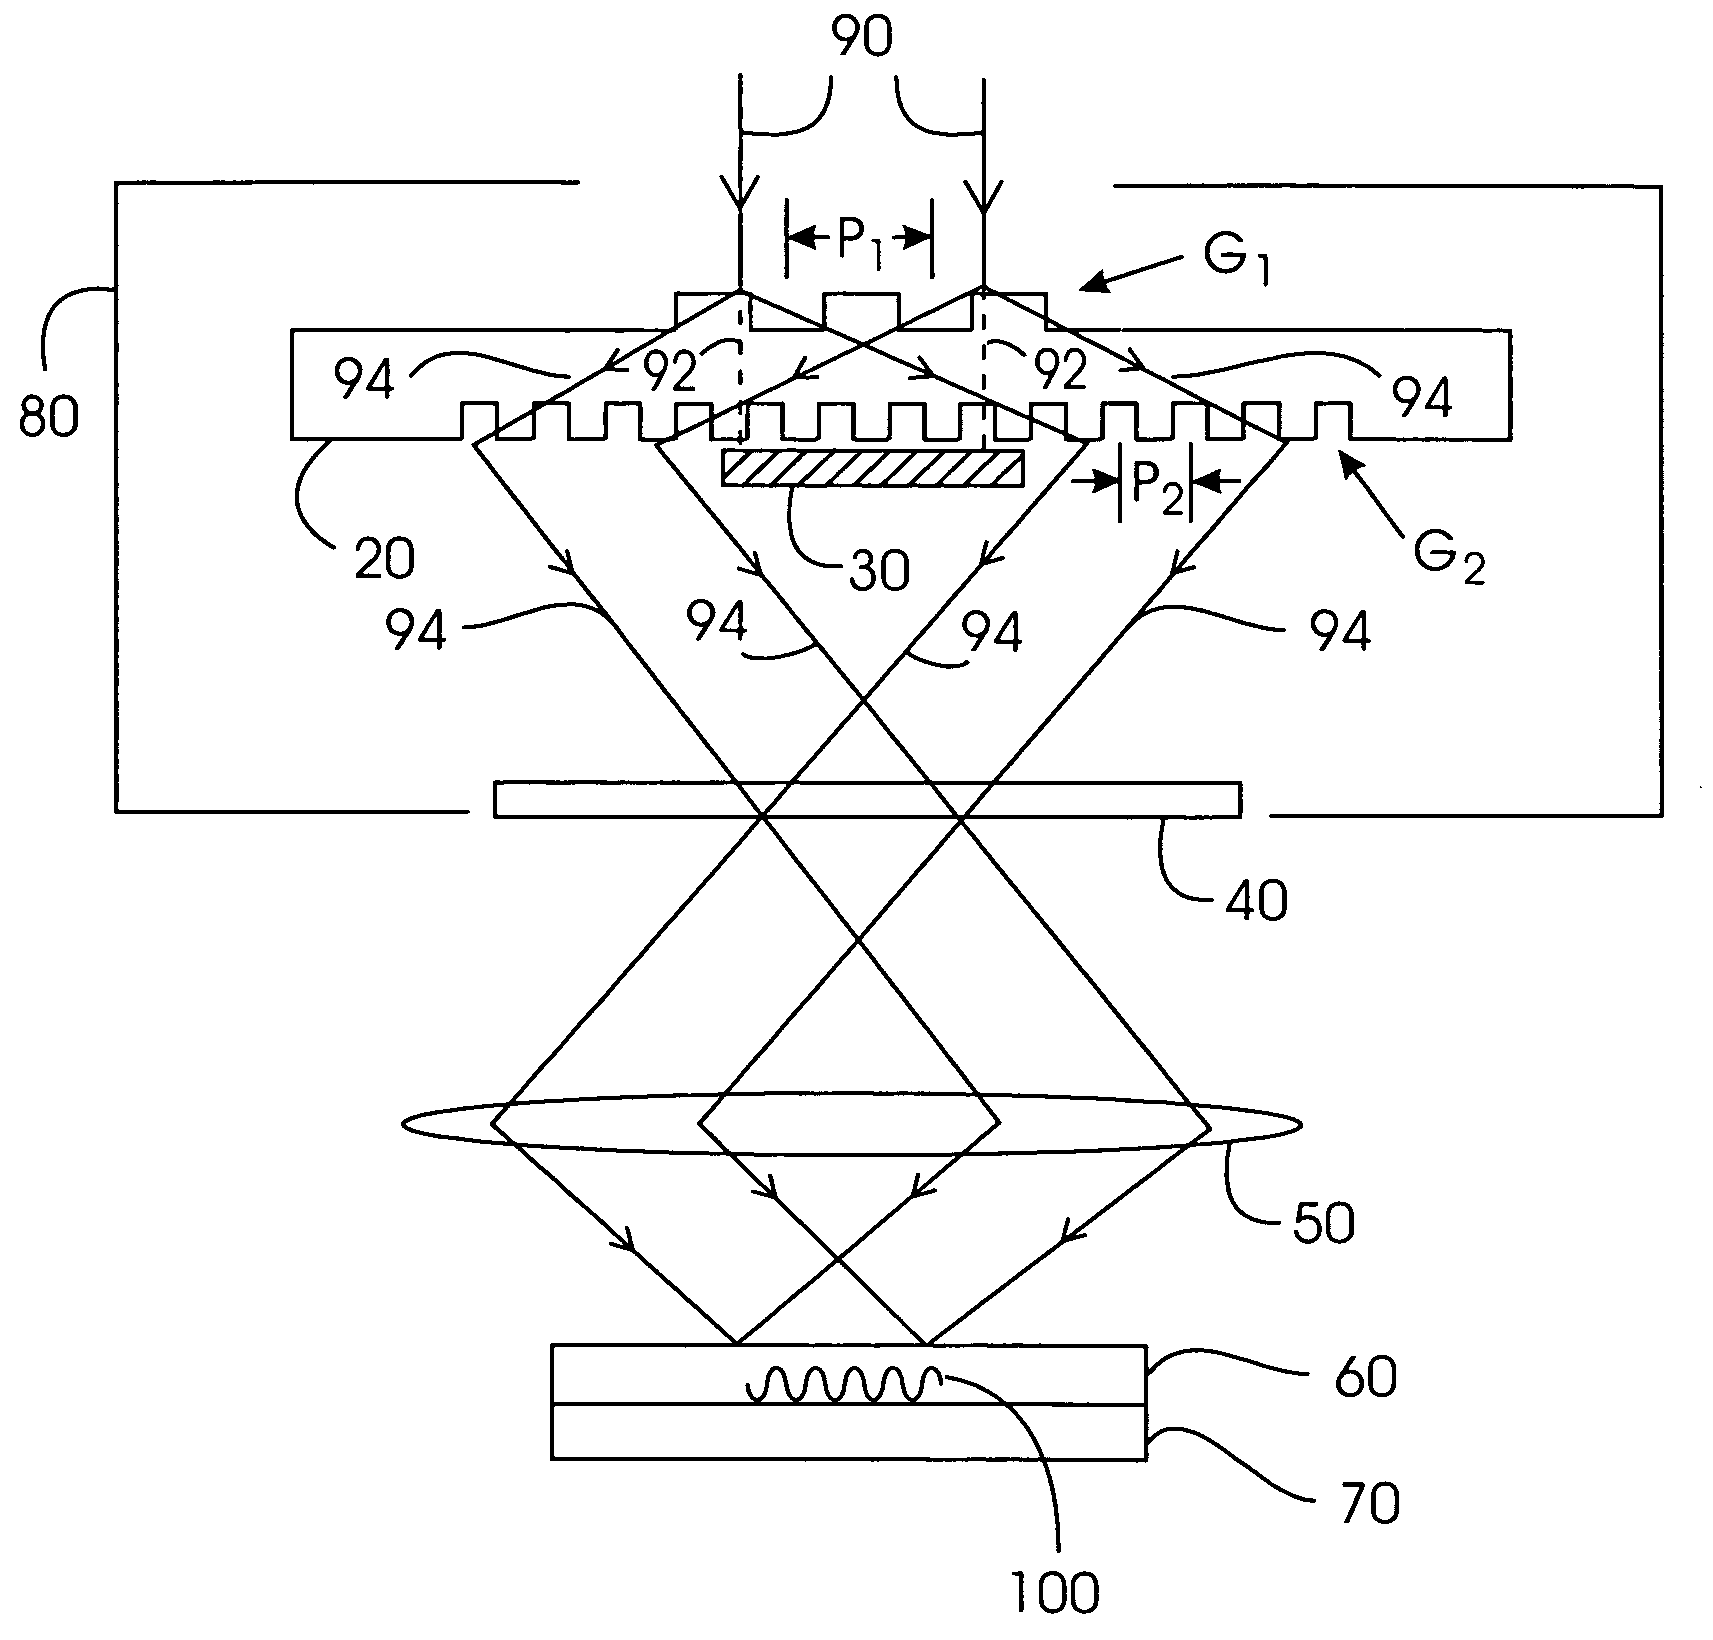 Apparatus for characterization of photoresist resolution, and method of use